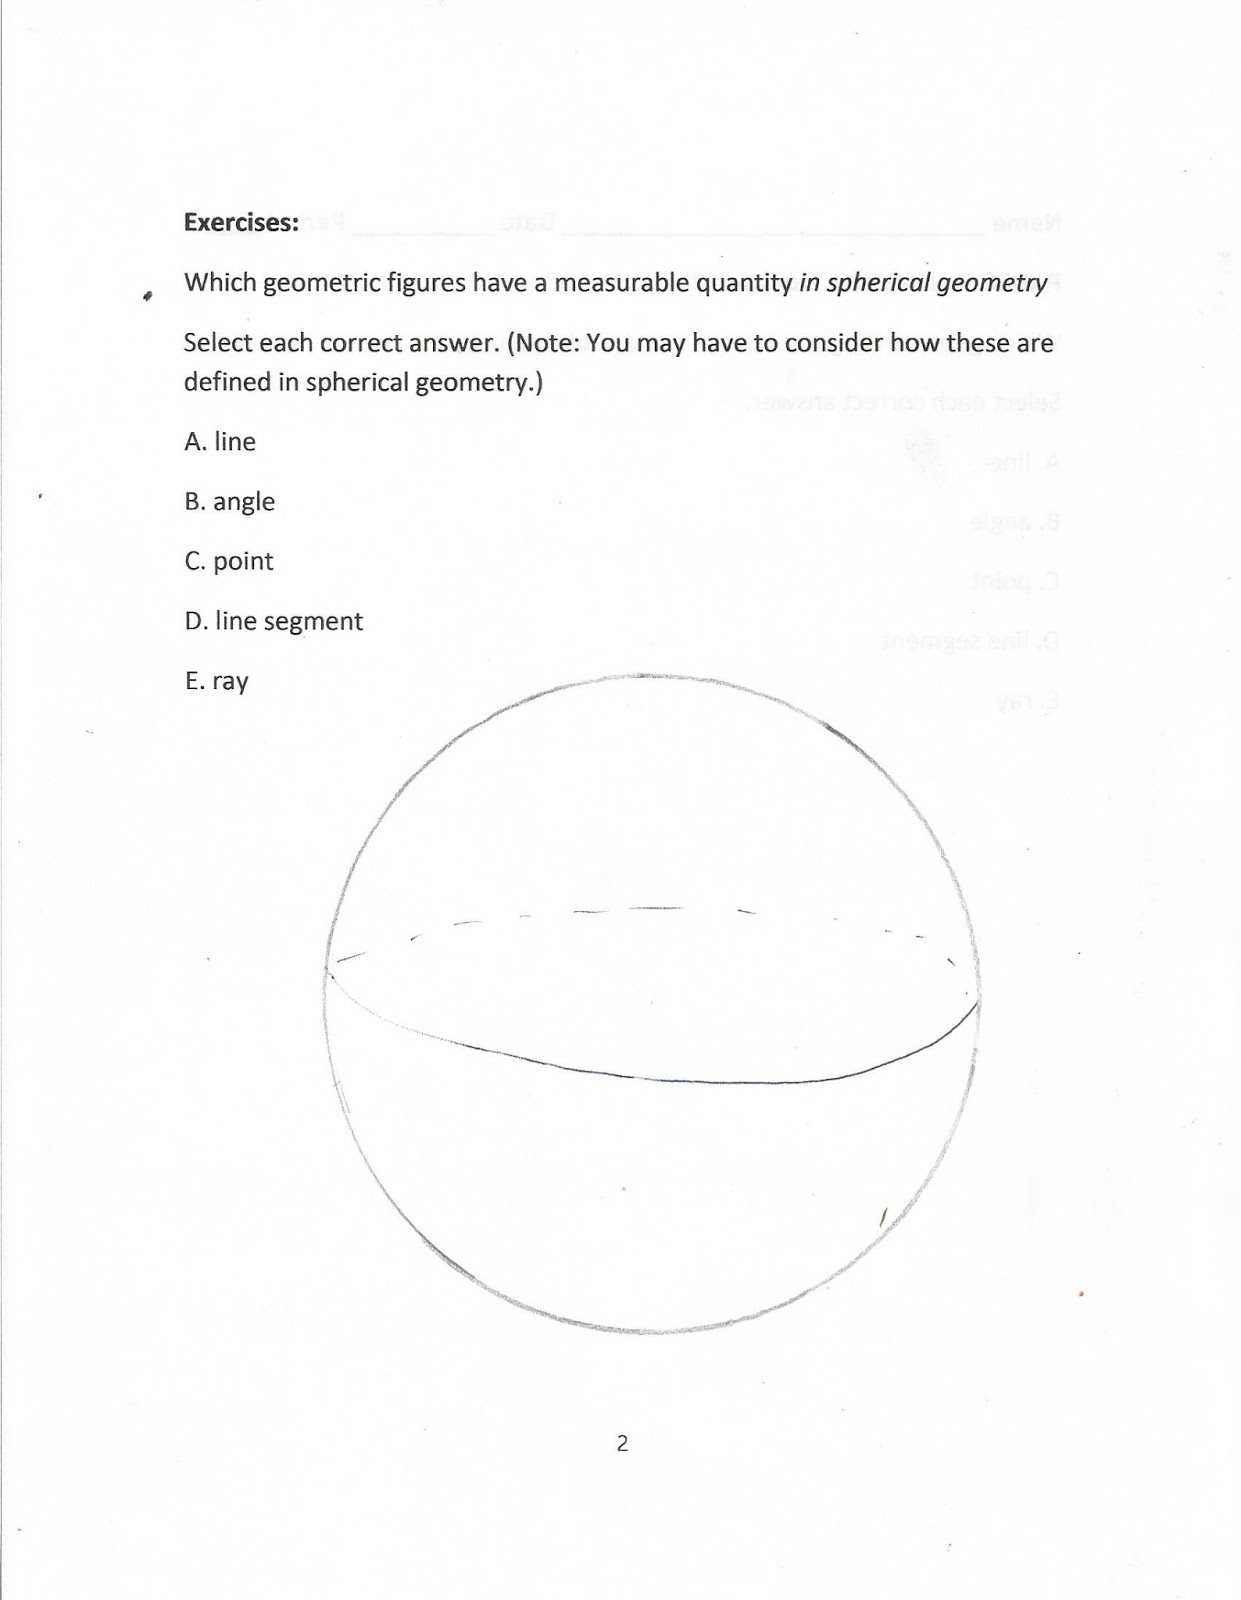 Skills Worksheet Concept Review Answers as Well as Geometry Mon Core Style May 2016